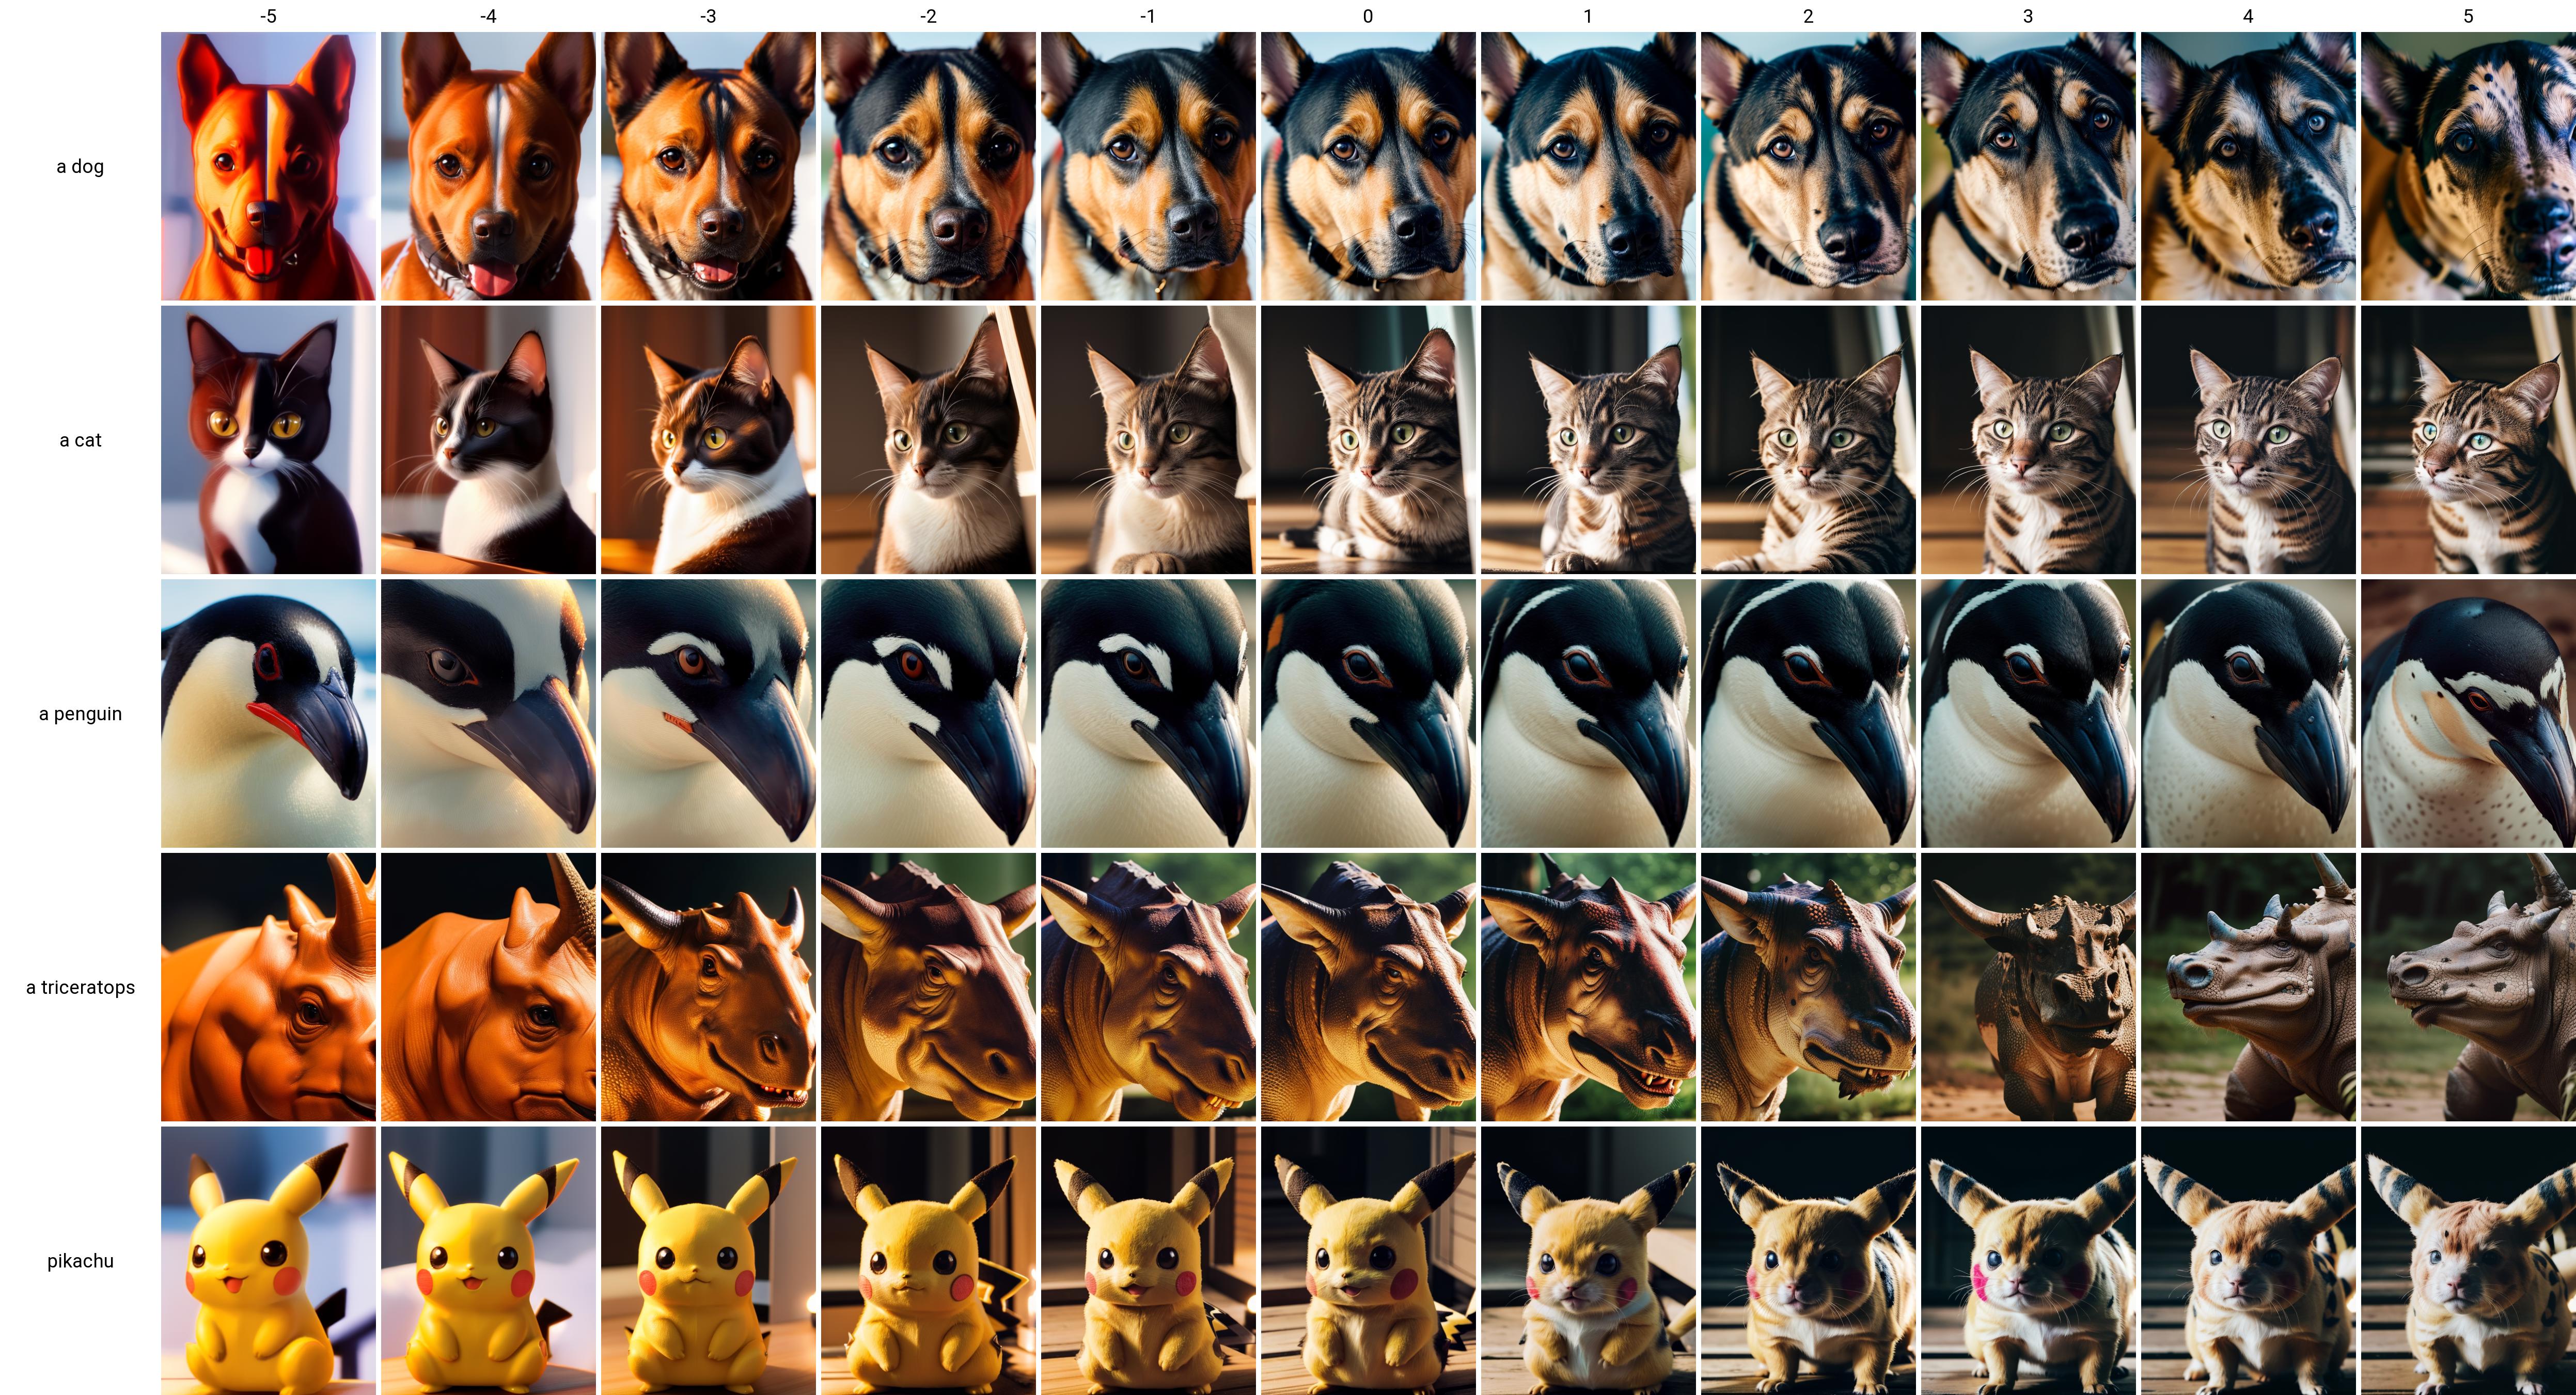 A Comparison of Pets: Dogs, Cats, and Pokemon

In this image, there is a side-by-side comparison of dogs, cats, and Pokemon figures. There are nine dog pictures and nine cat pictures, each featuring a different dog and cat. The dogs are positioned on the left side of the image, while the cats are on the right side. Additionally, there are nine Pokemon figures, each with unique characteristics, displayed in the middle of the image. The arrangement creates an interesting and engaging visual presentation, showcasing the differences and